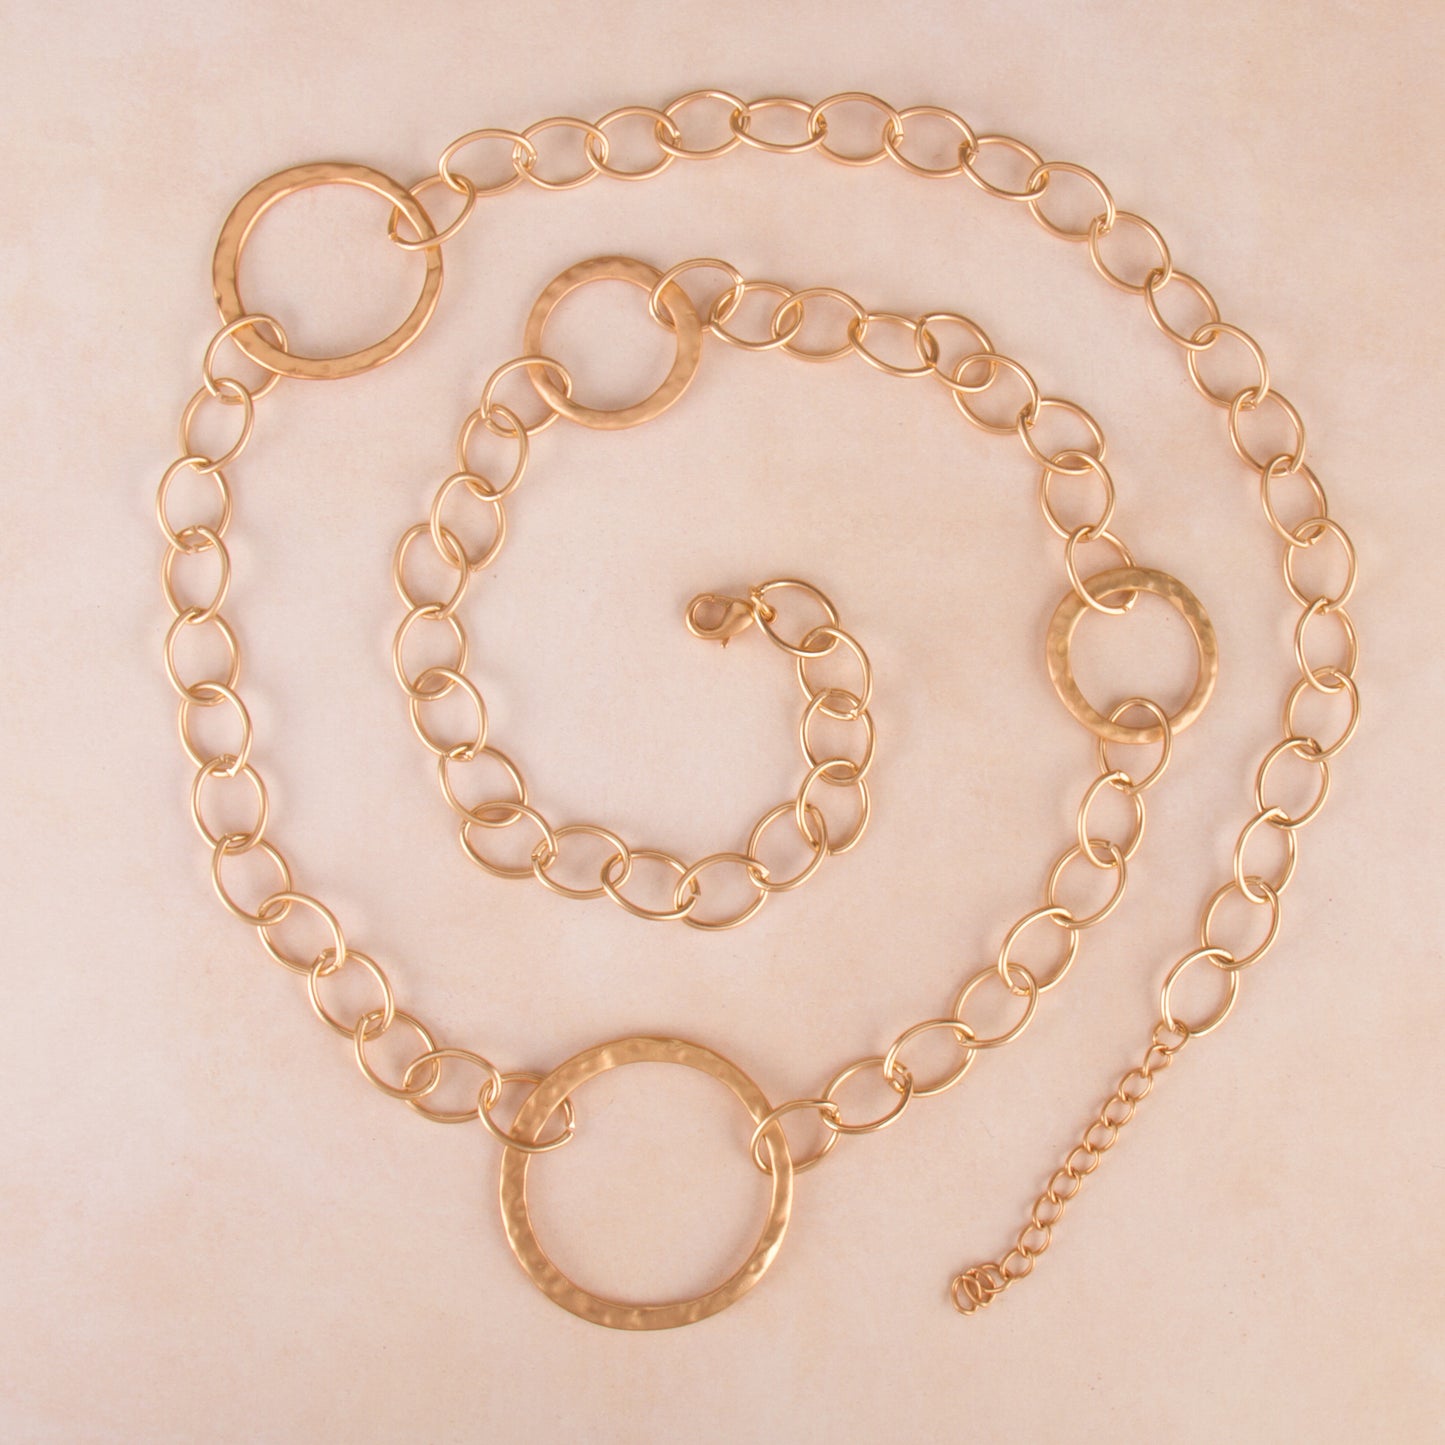 N3266-GD 30" Large Link Chain Necklace with Circles